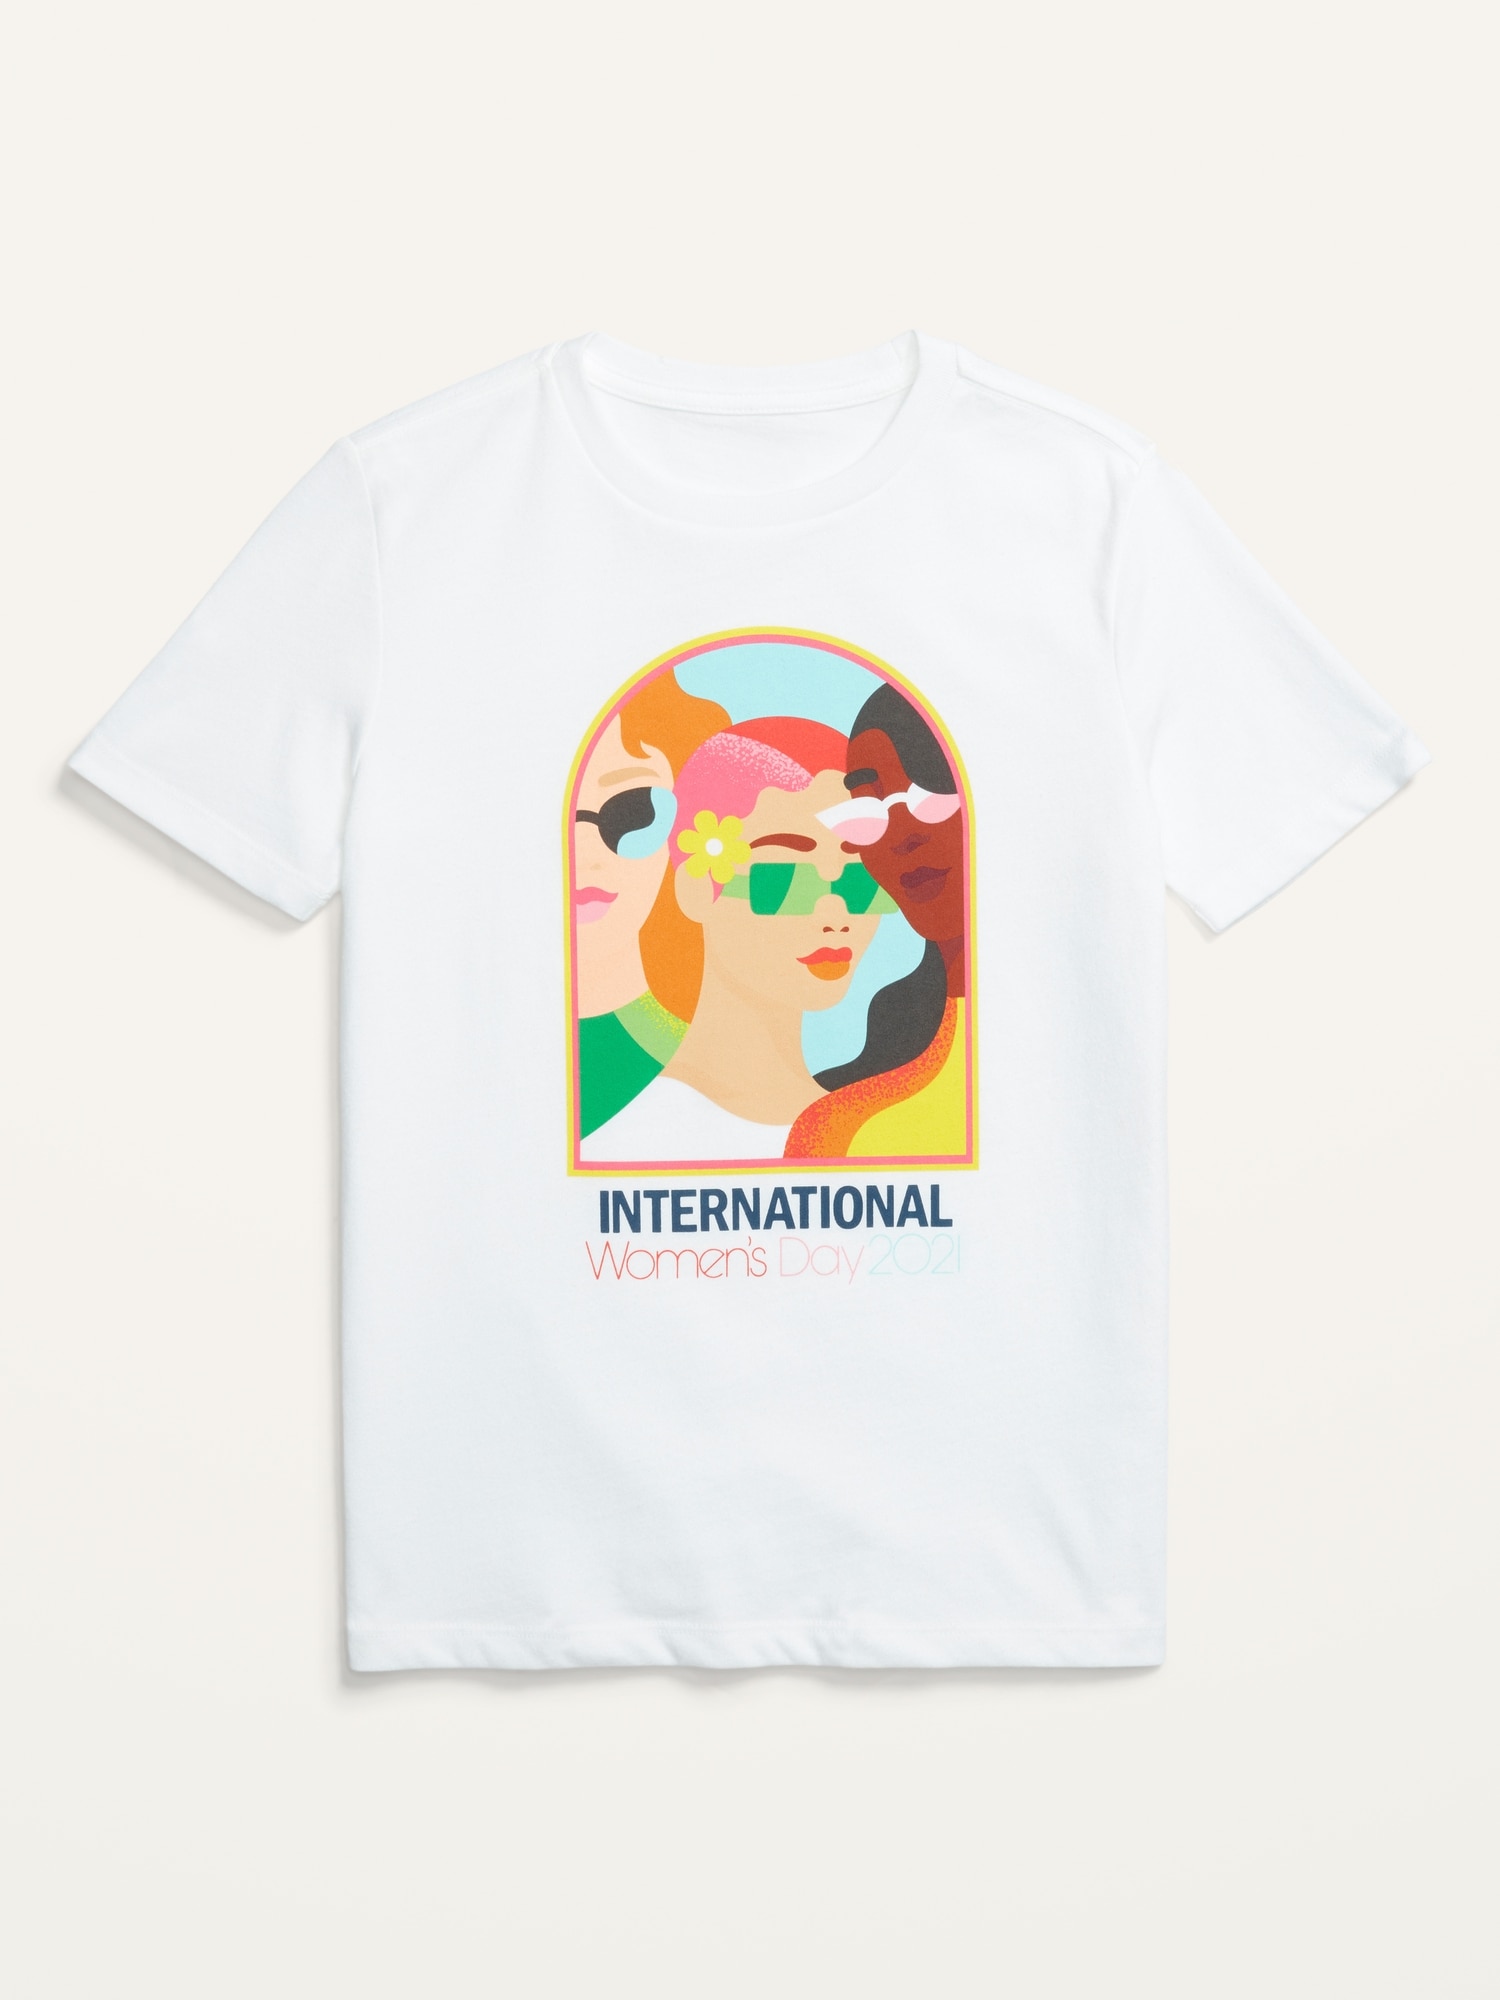 Project WE International Women's Day 2021 Tee by Jade Purple Brown for Kids